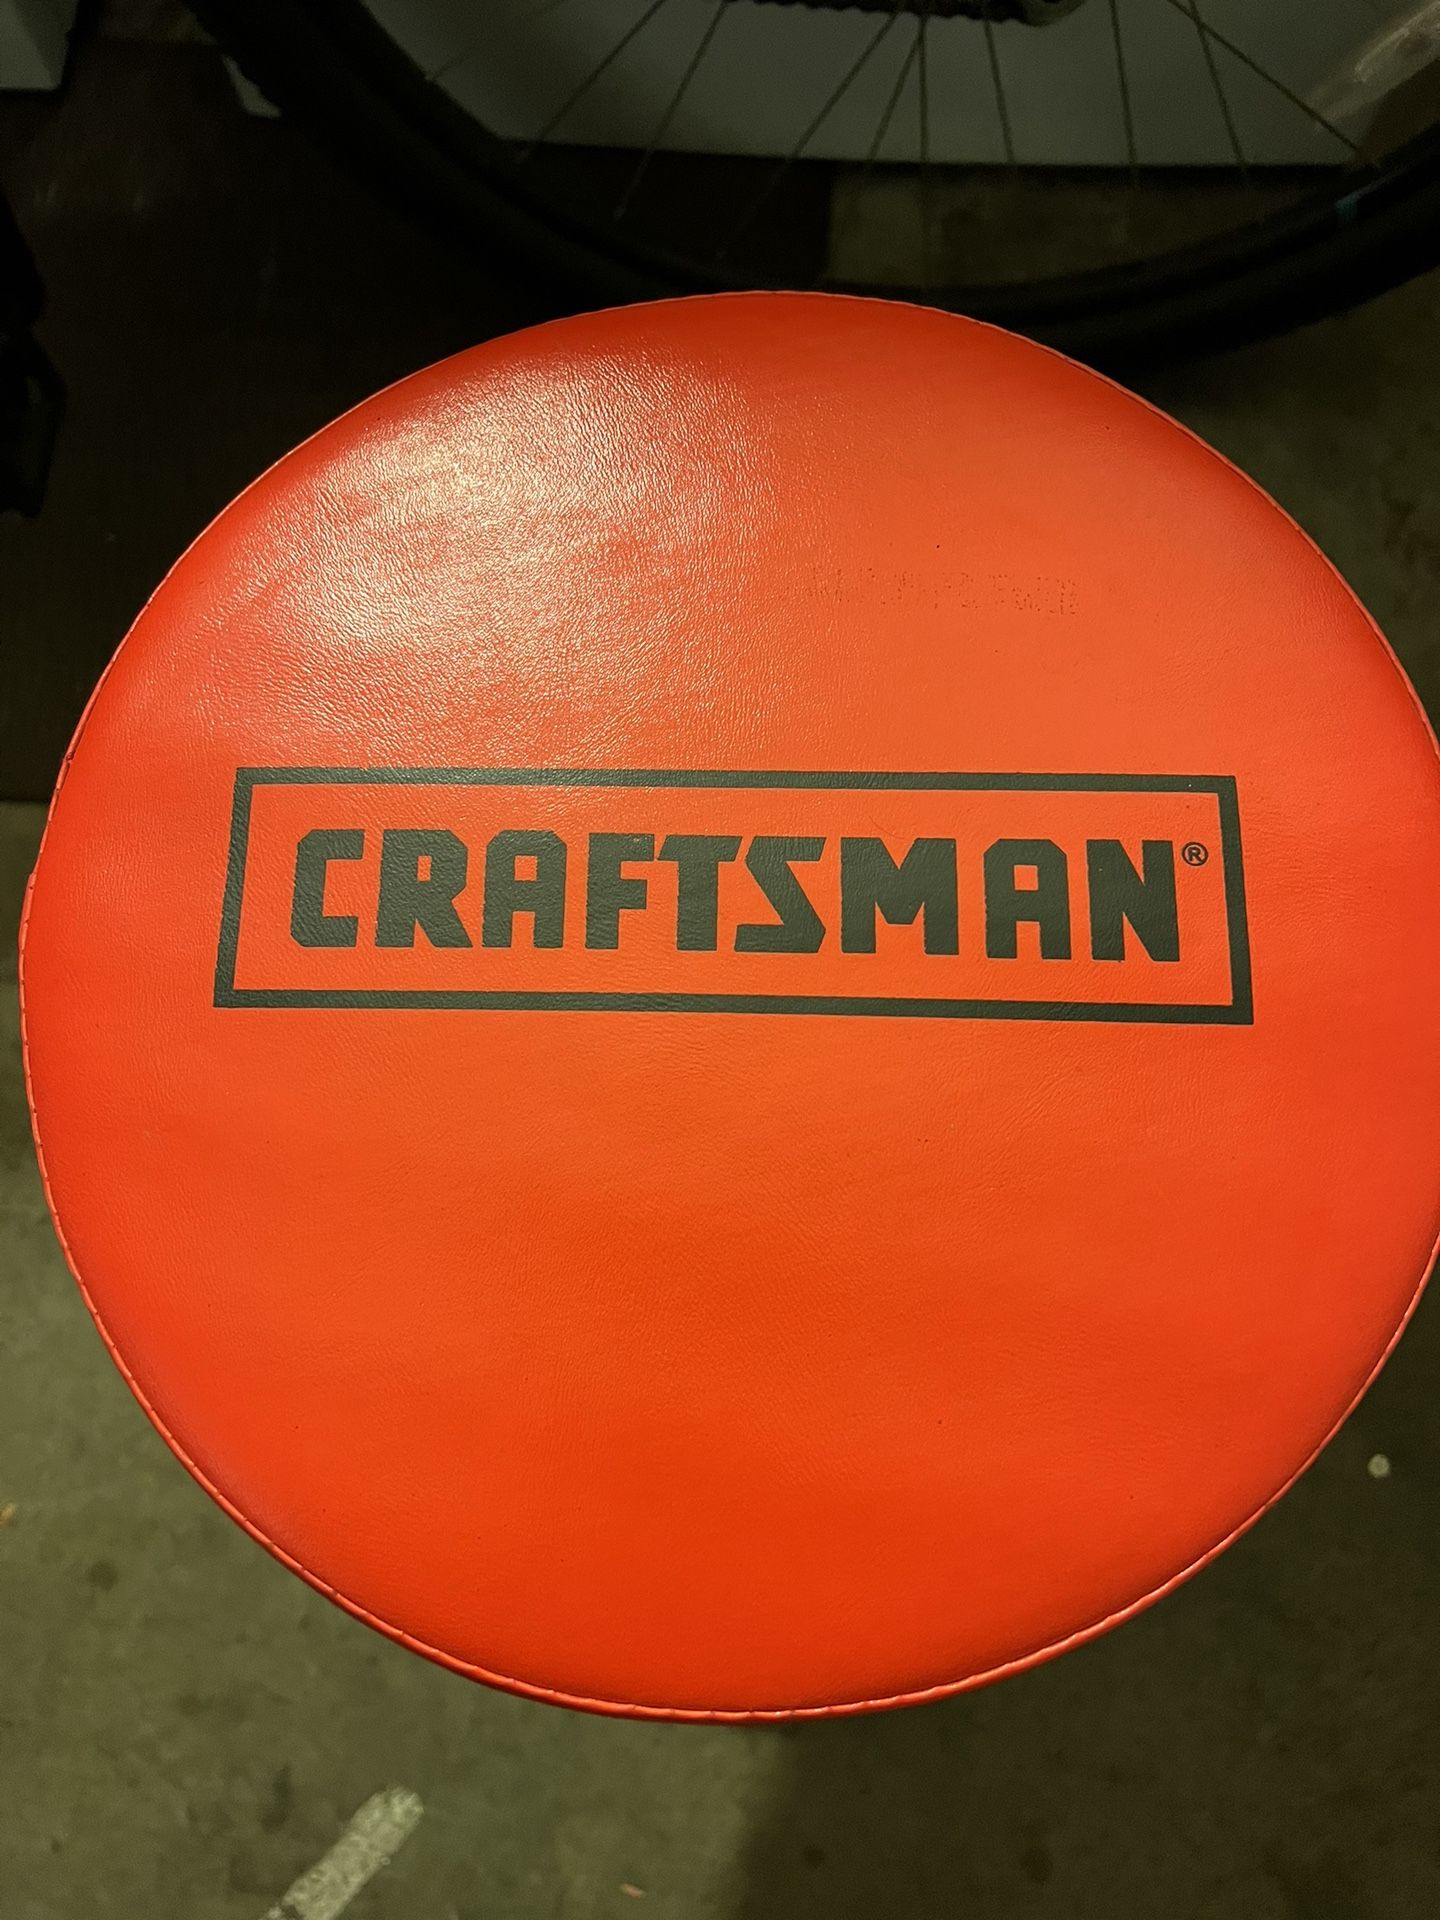 Rolling Stool By Craftsman 